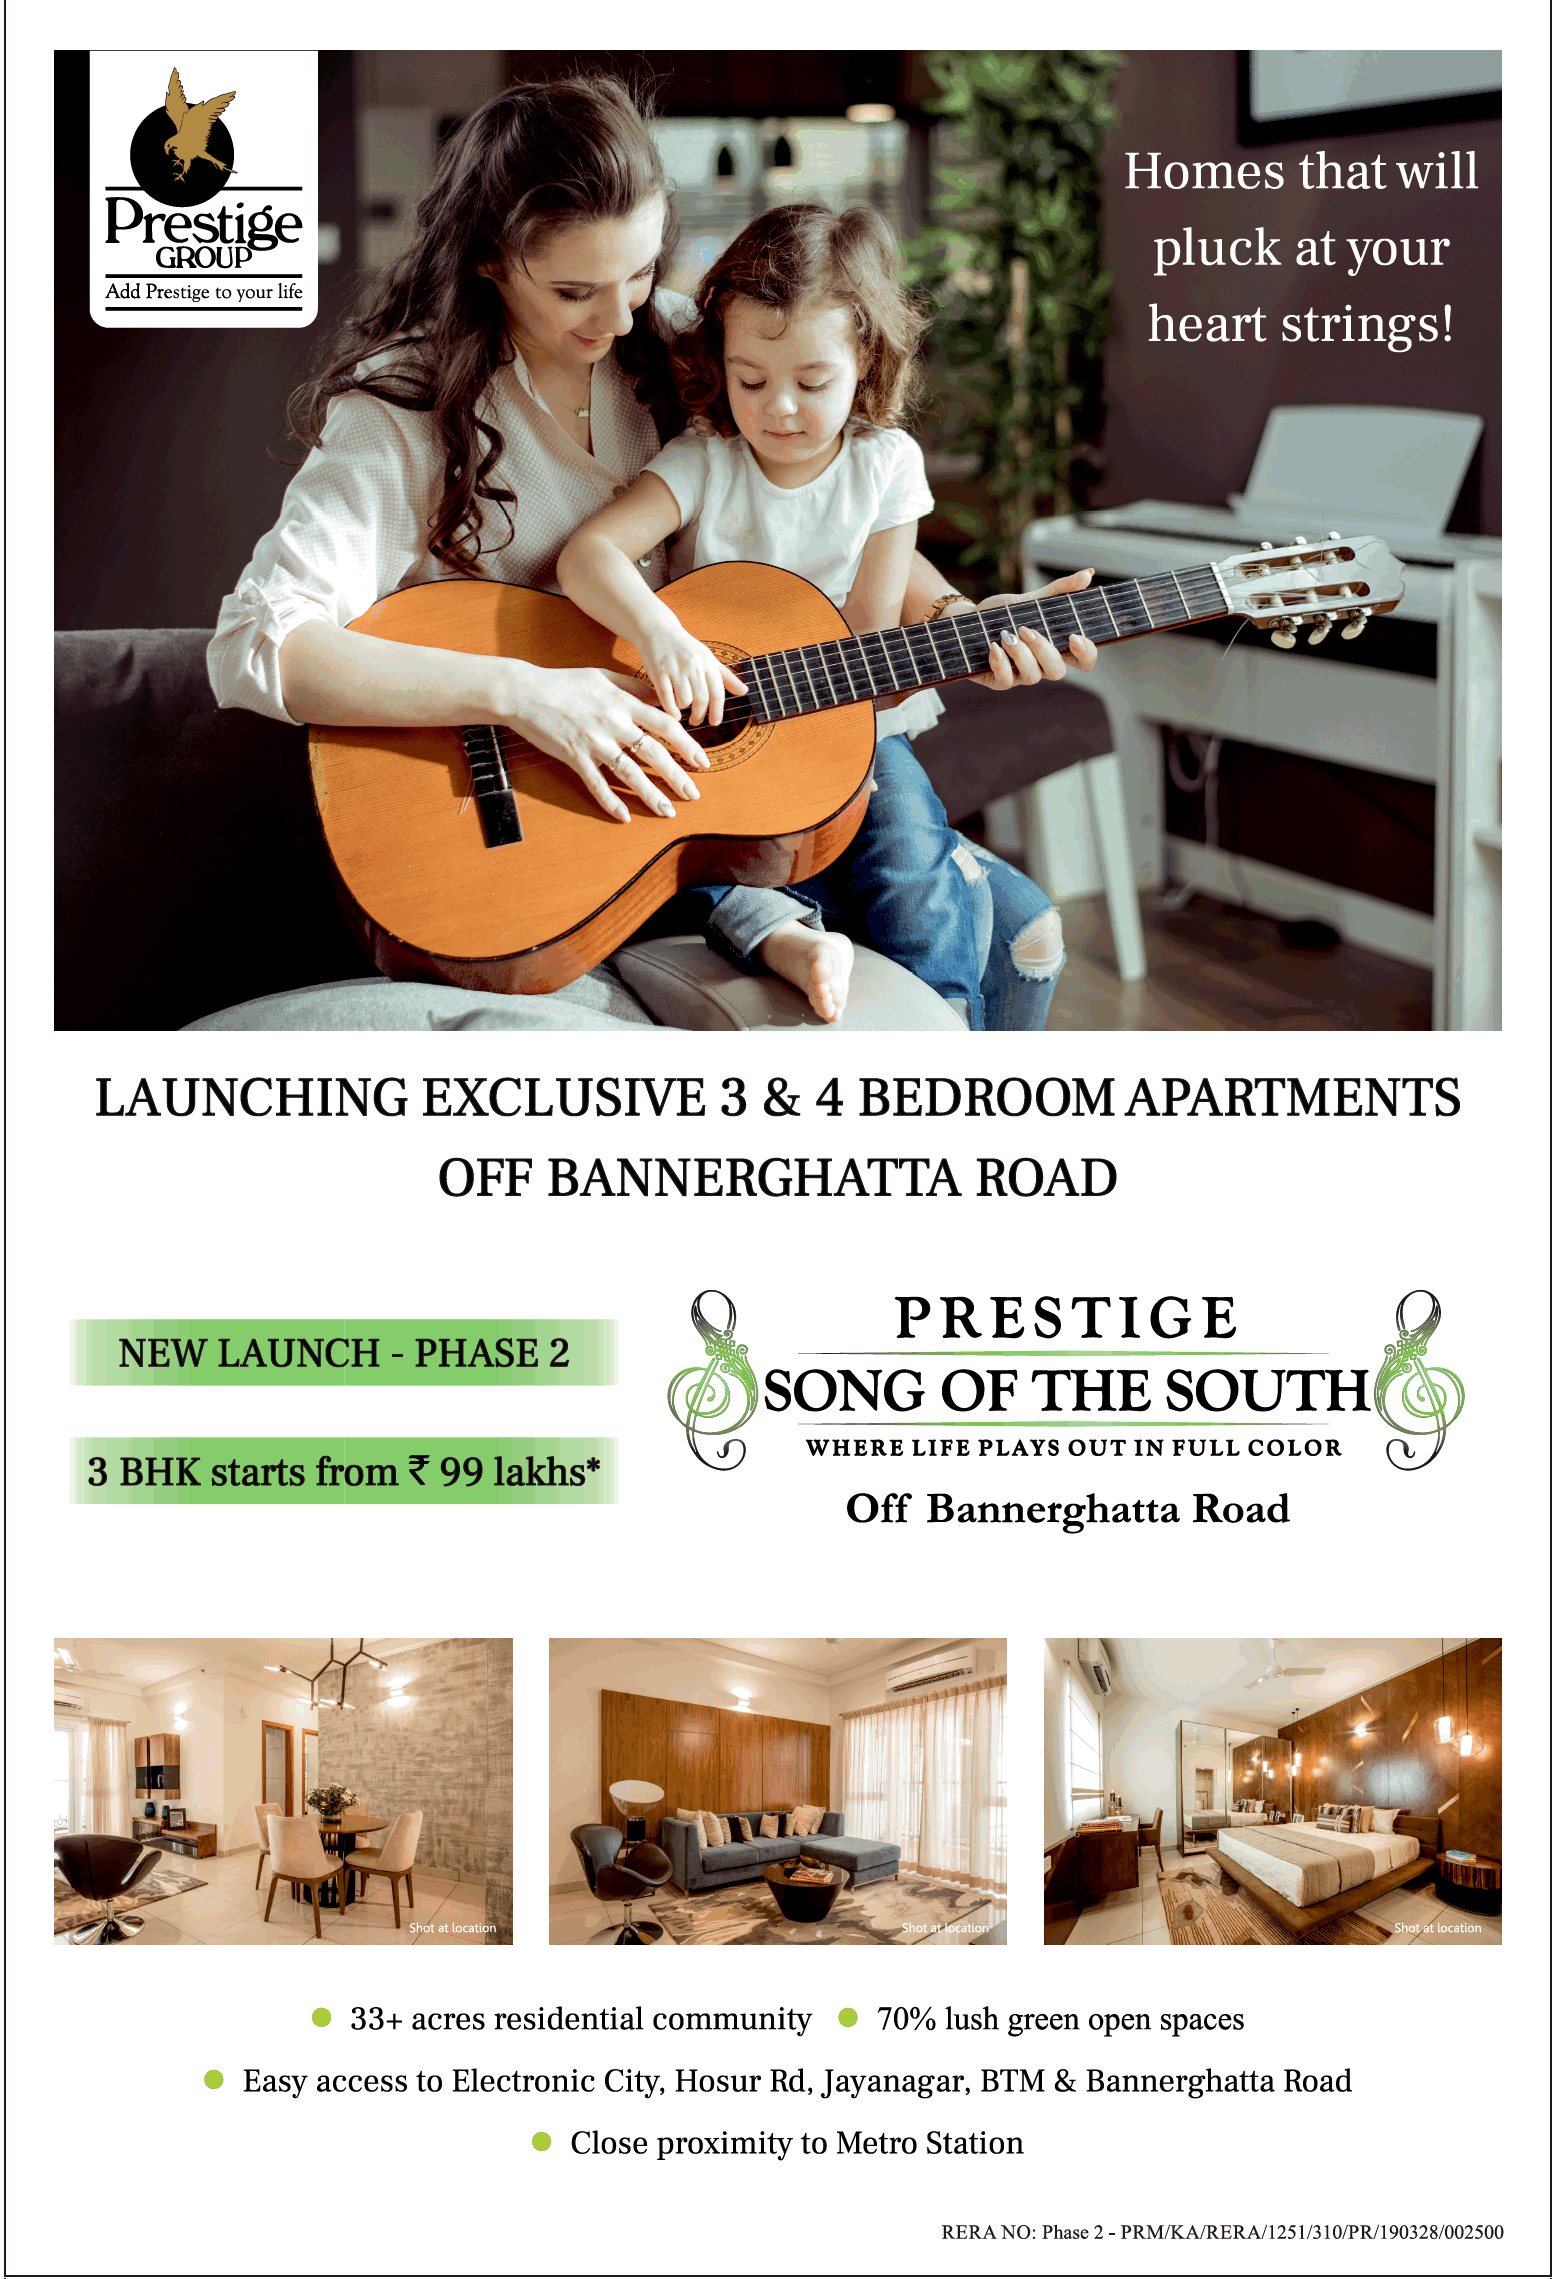 Launching exclusive 3 & 4 bedroom apartments at Prestige Song of the South in Bangalore Update